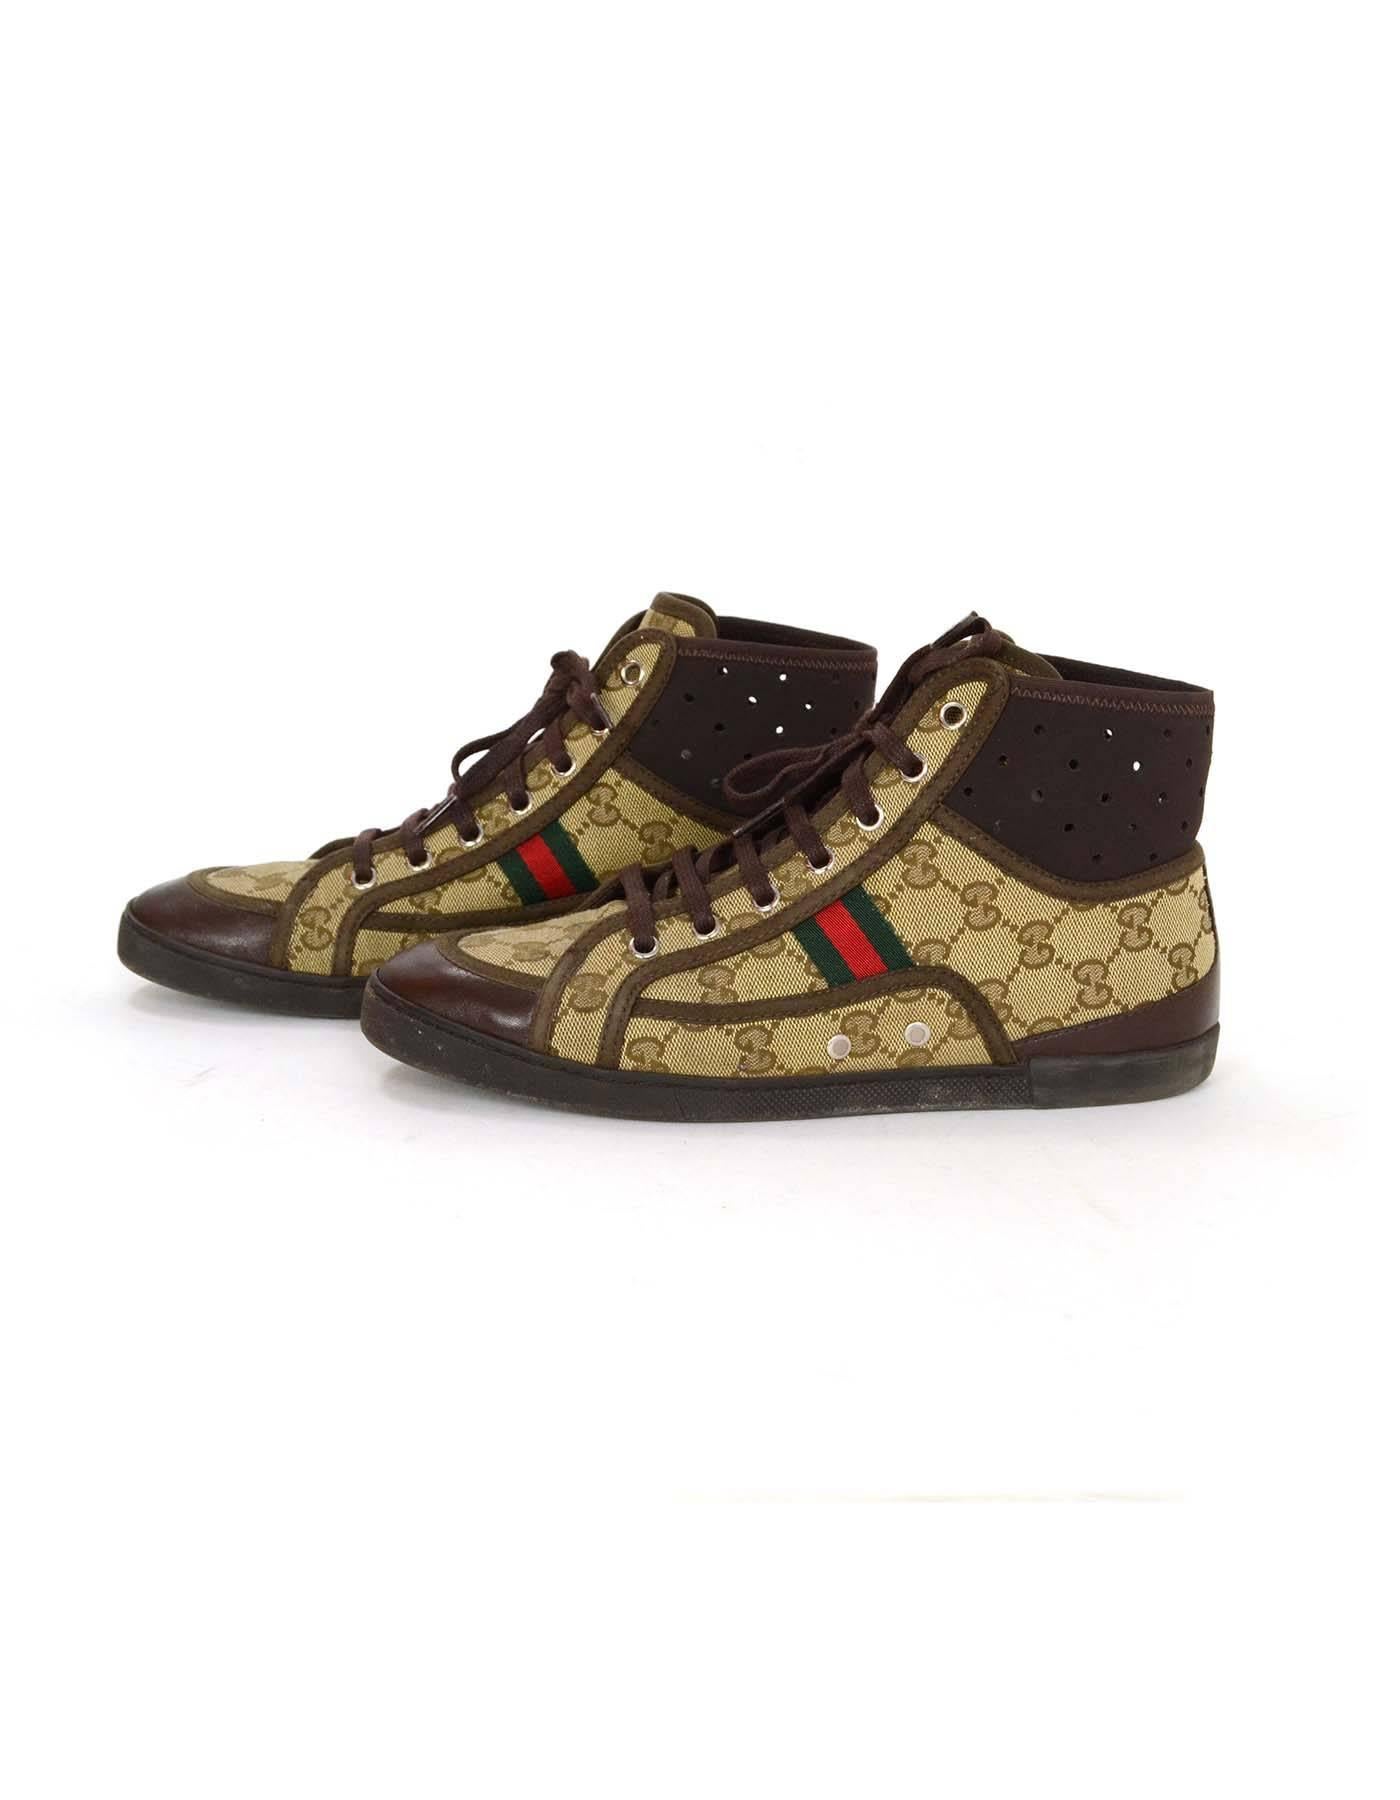 Gucci Monogram Tan & Brown High Top Sneakers sz 37.5
Features Gucci monogram throughout 
Made In: Italy
Color: Tan and brown
Materials: Leather, canvas and rubber
Closure/Opening: Lace up 
Sole Stamp: Gucci Made in Italy 
Retail Price: $450 +